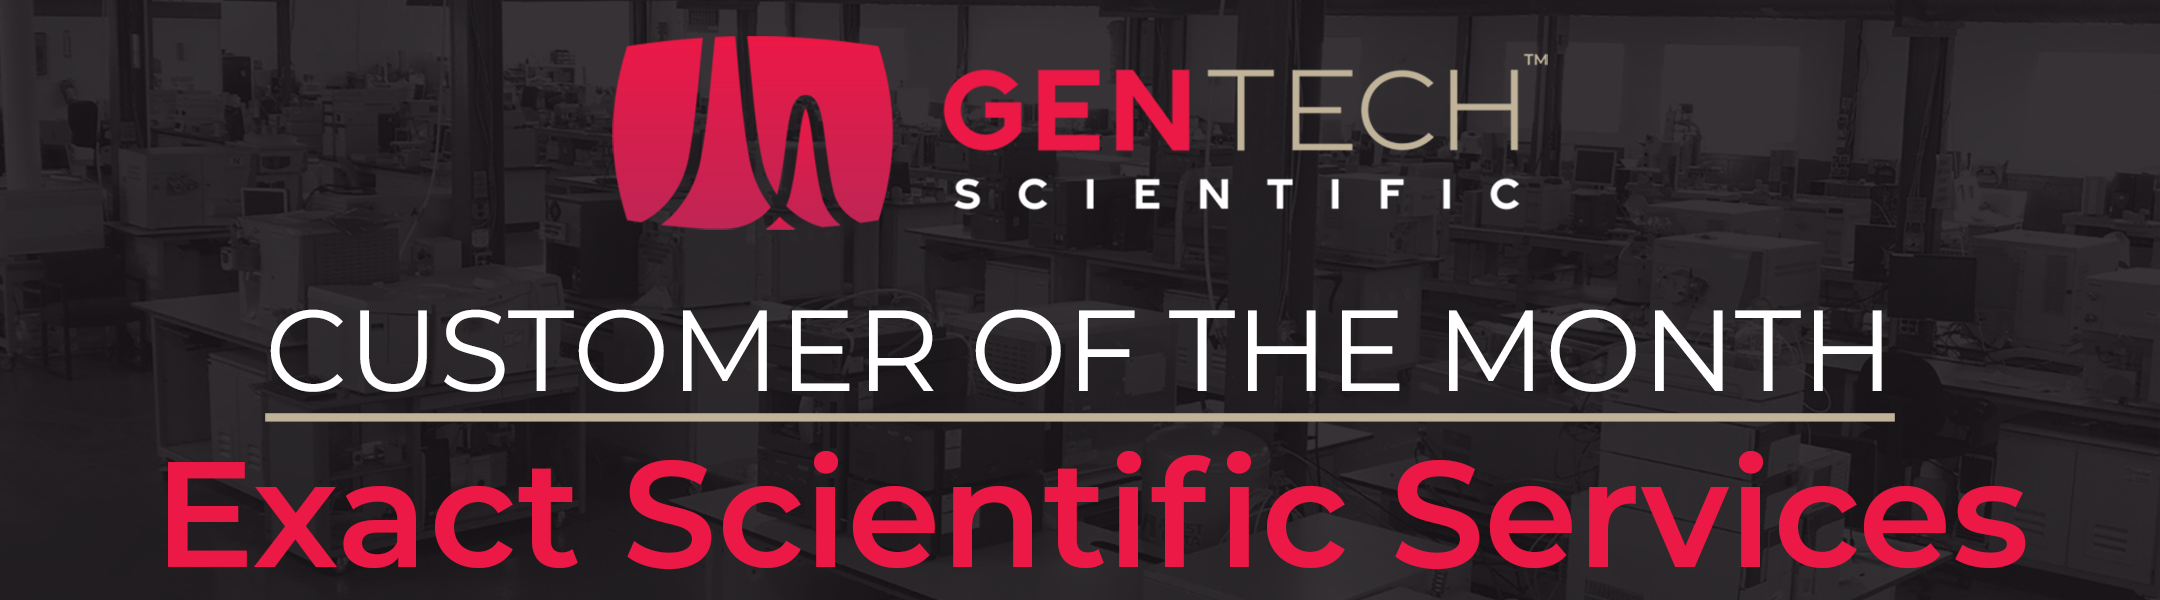 Meet our April Customer of the Month:  Exact Scientific Services